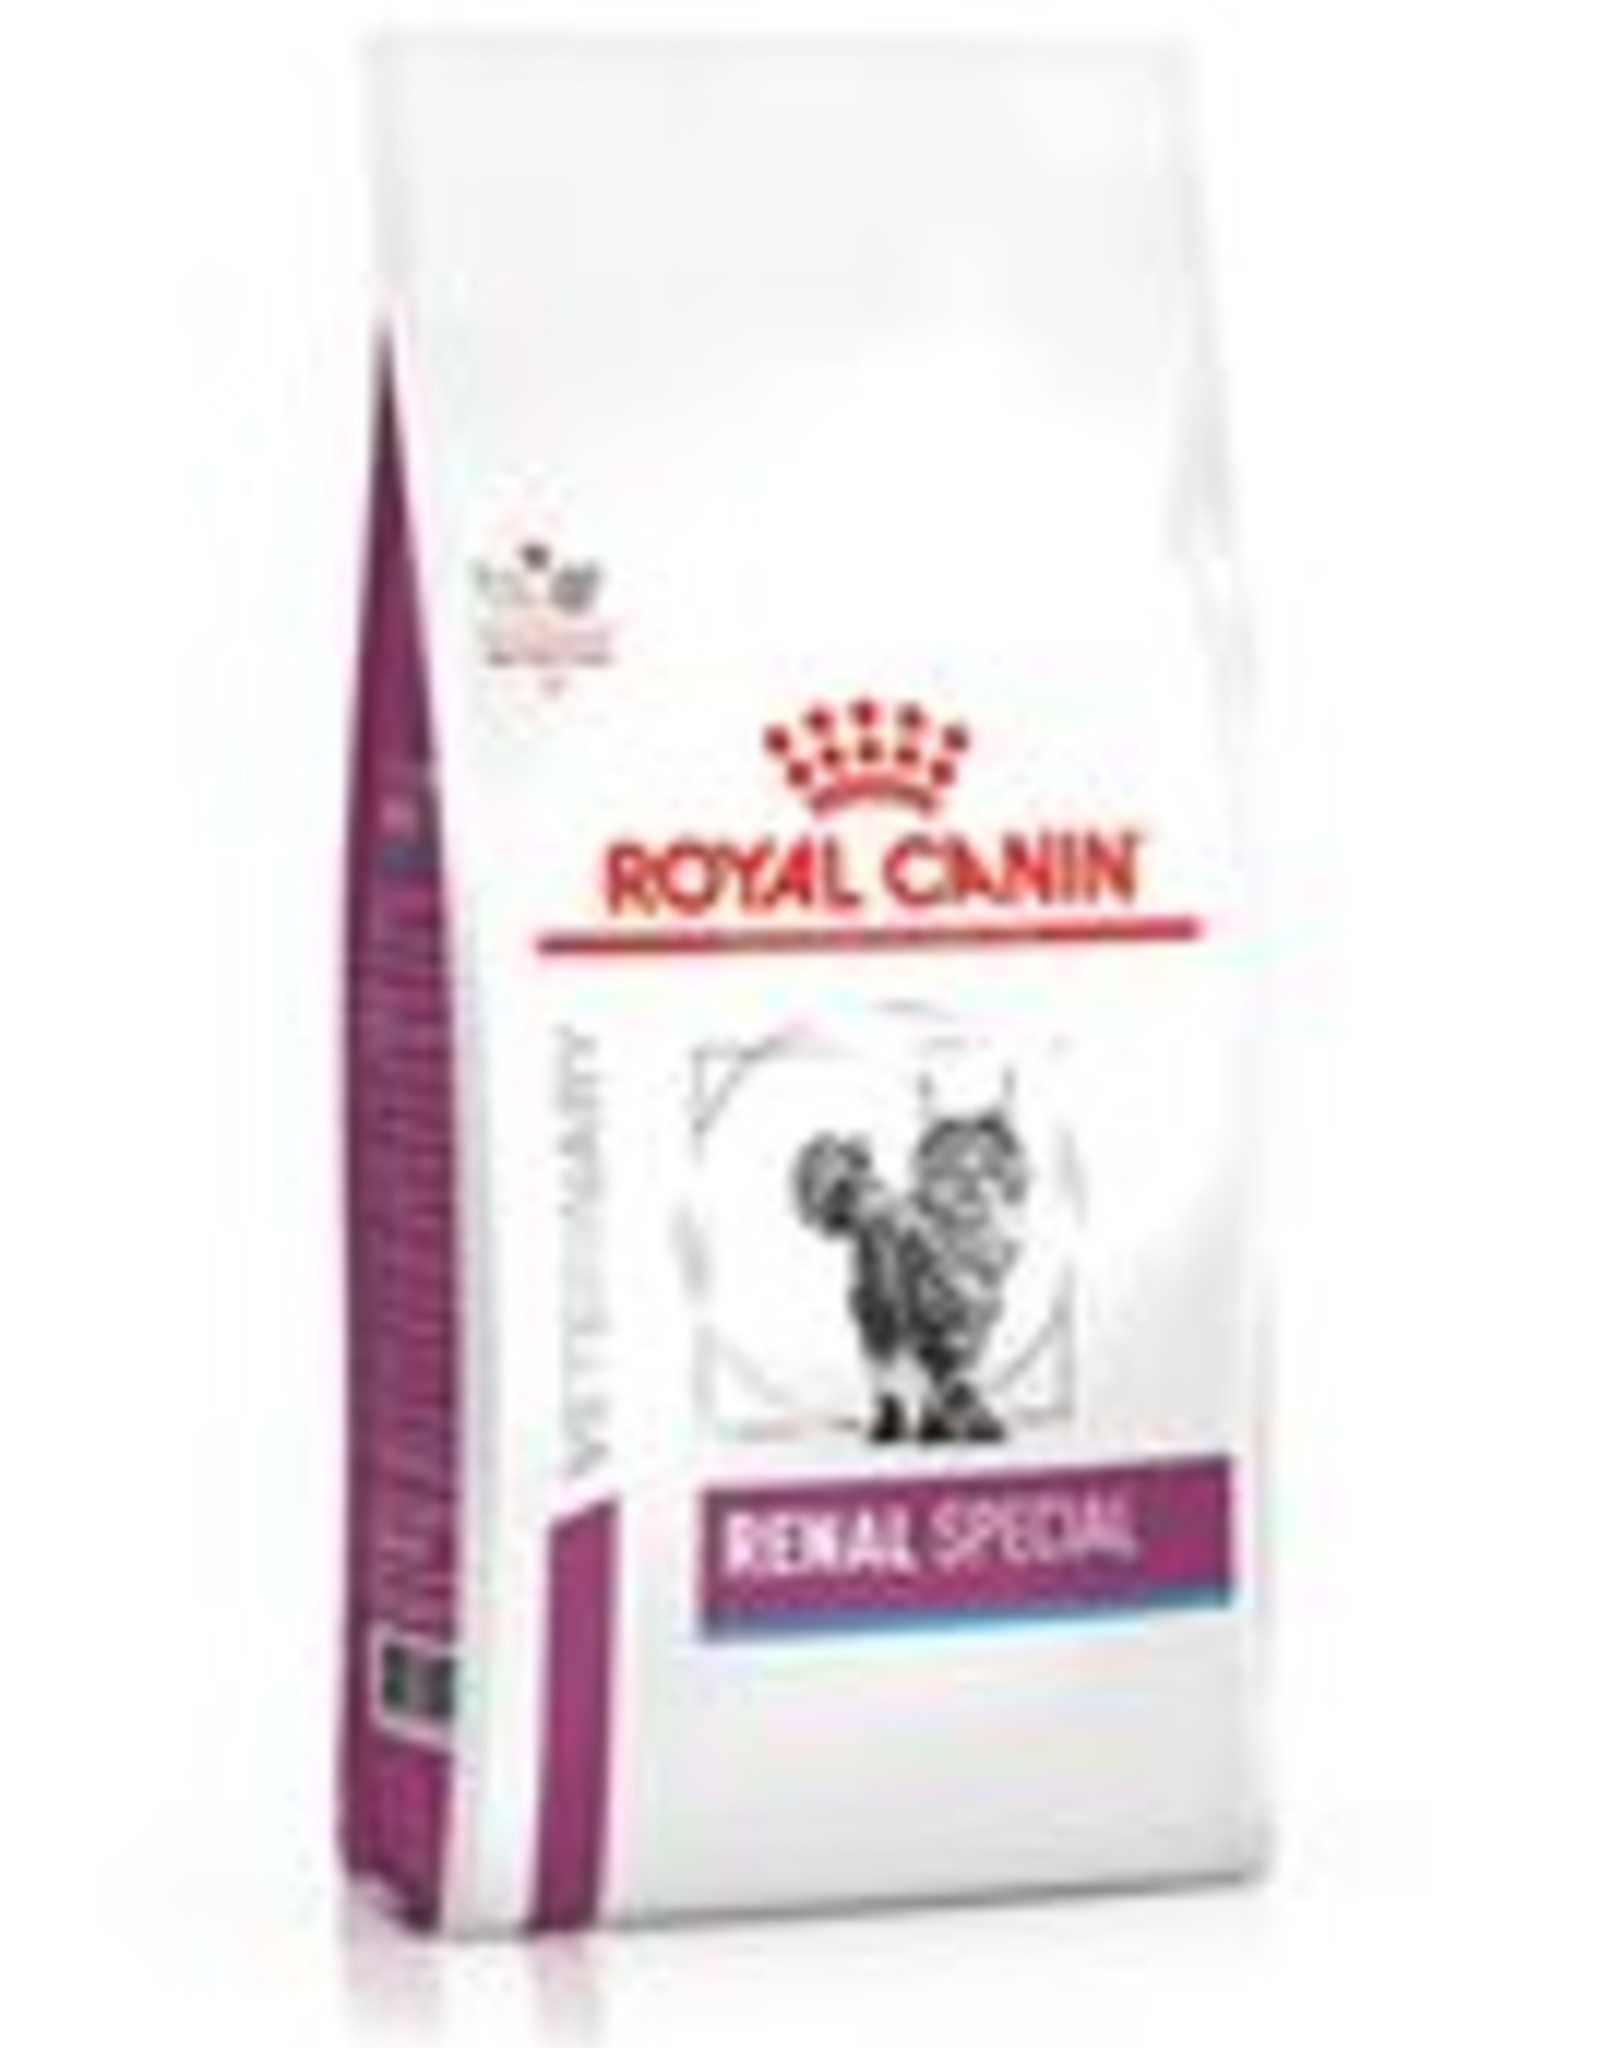 Royal Canin Royal Canin Vdiet Renal Special Katze 400gr